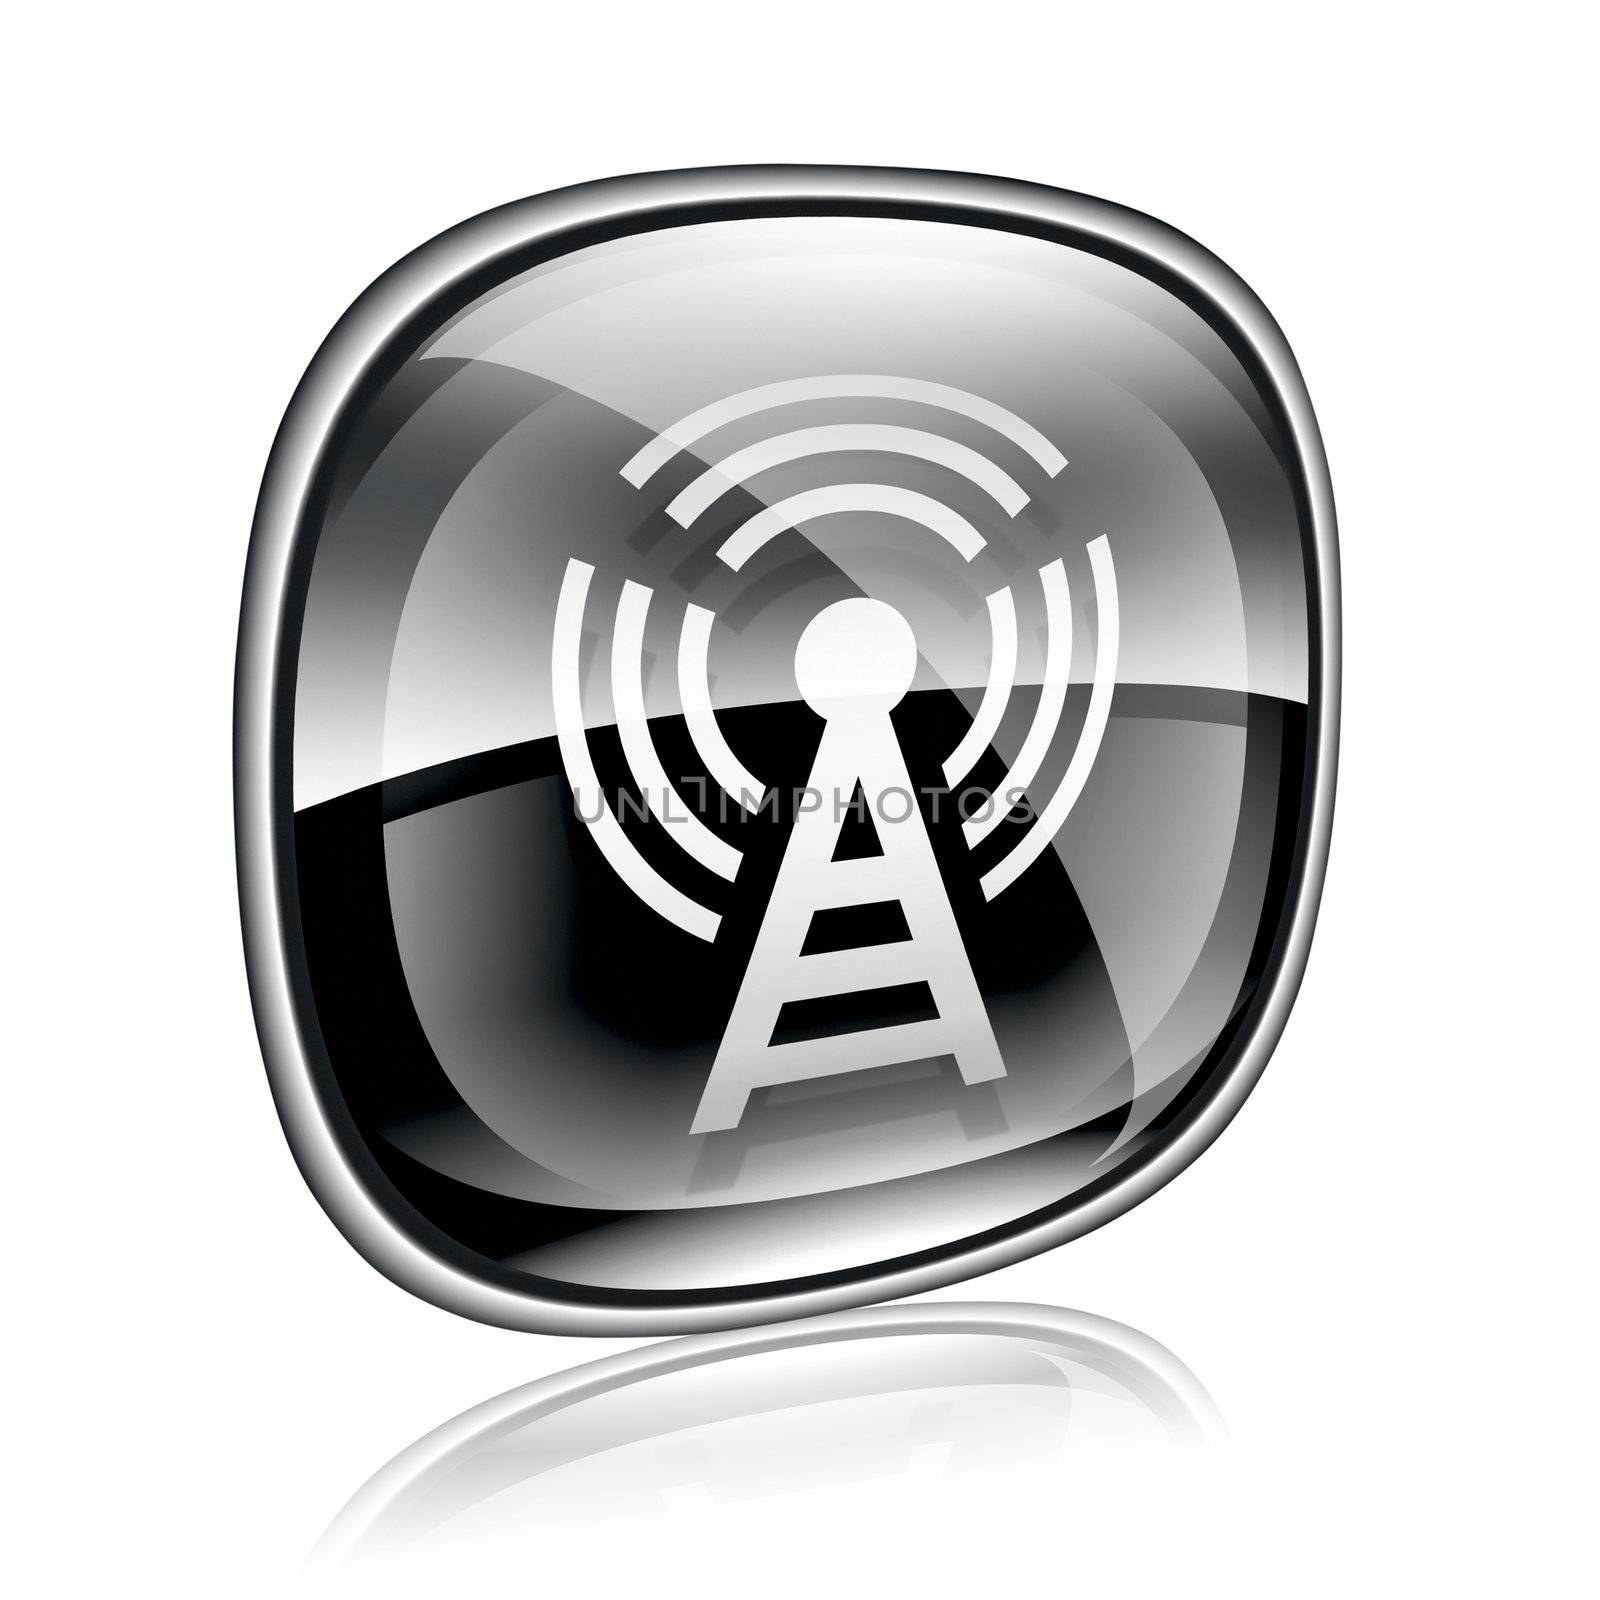 WI-FI tower icon black glass, isolated on white background